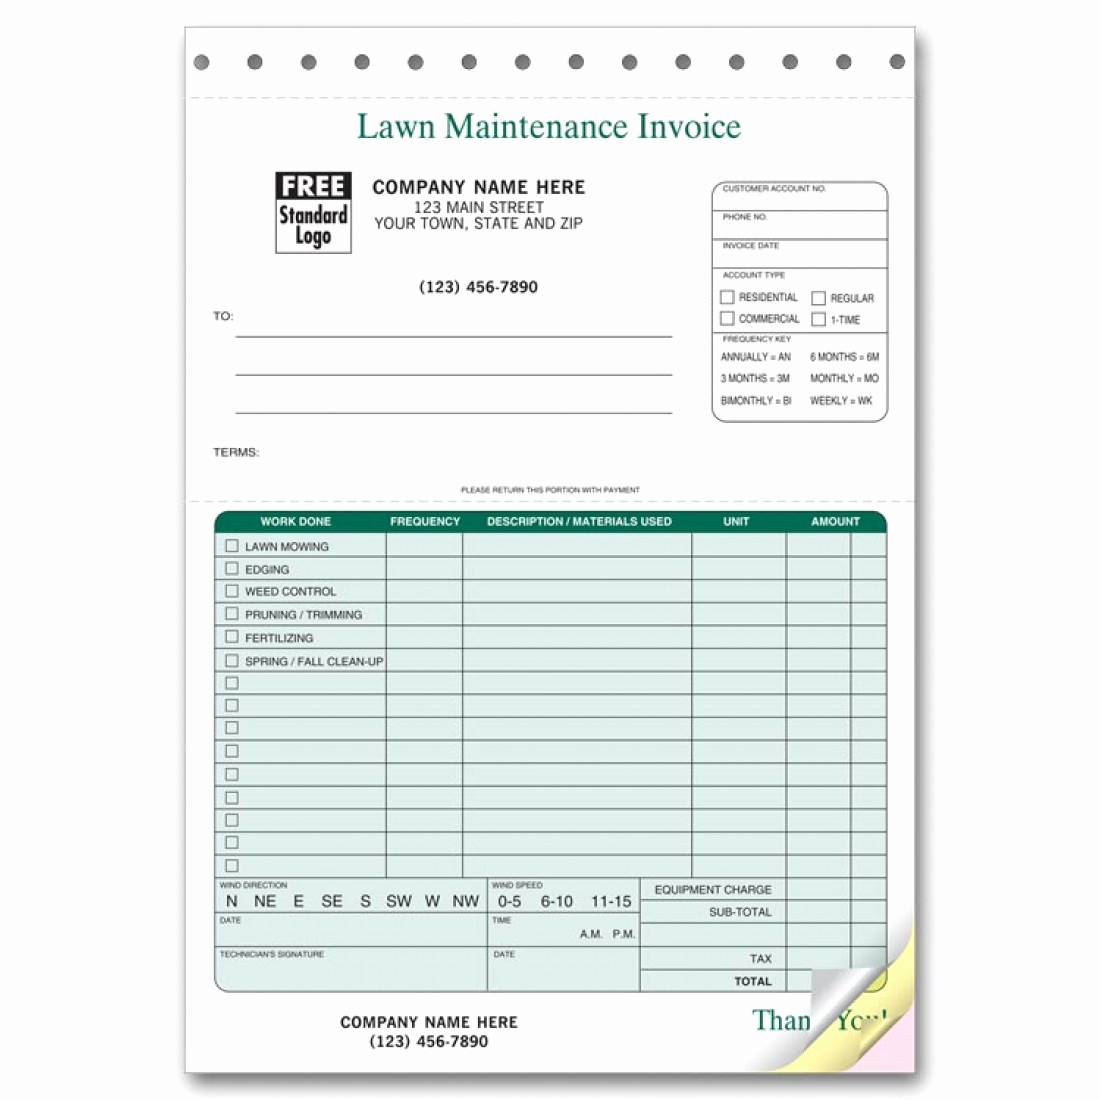 Lawn Care Invoice Template Beautiful Professional Invoices Lawn Maintenance Invoices 123 at